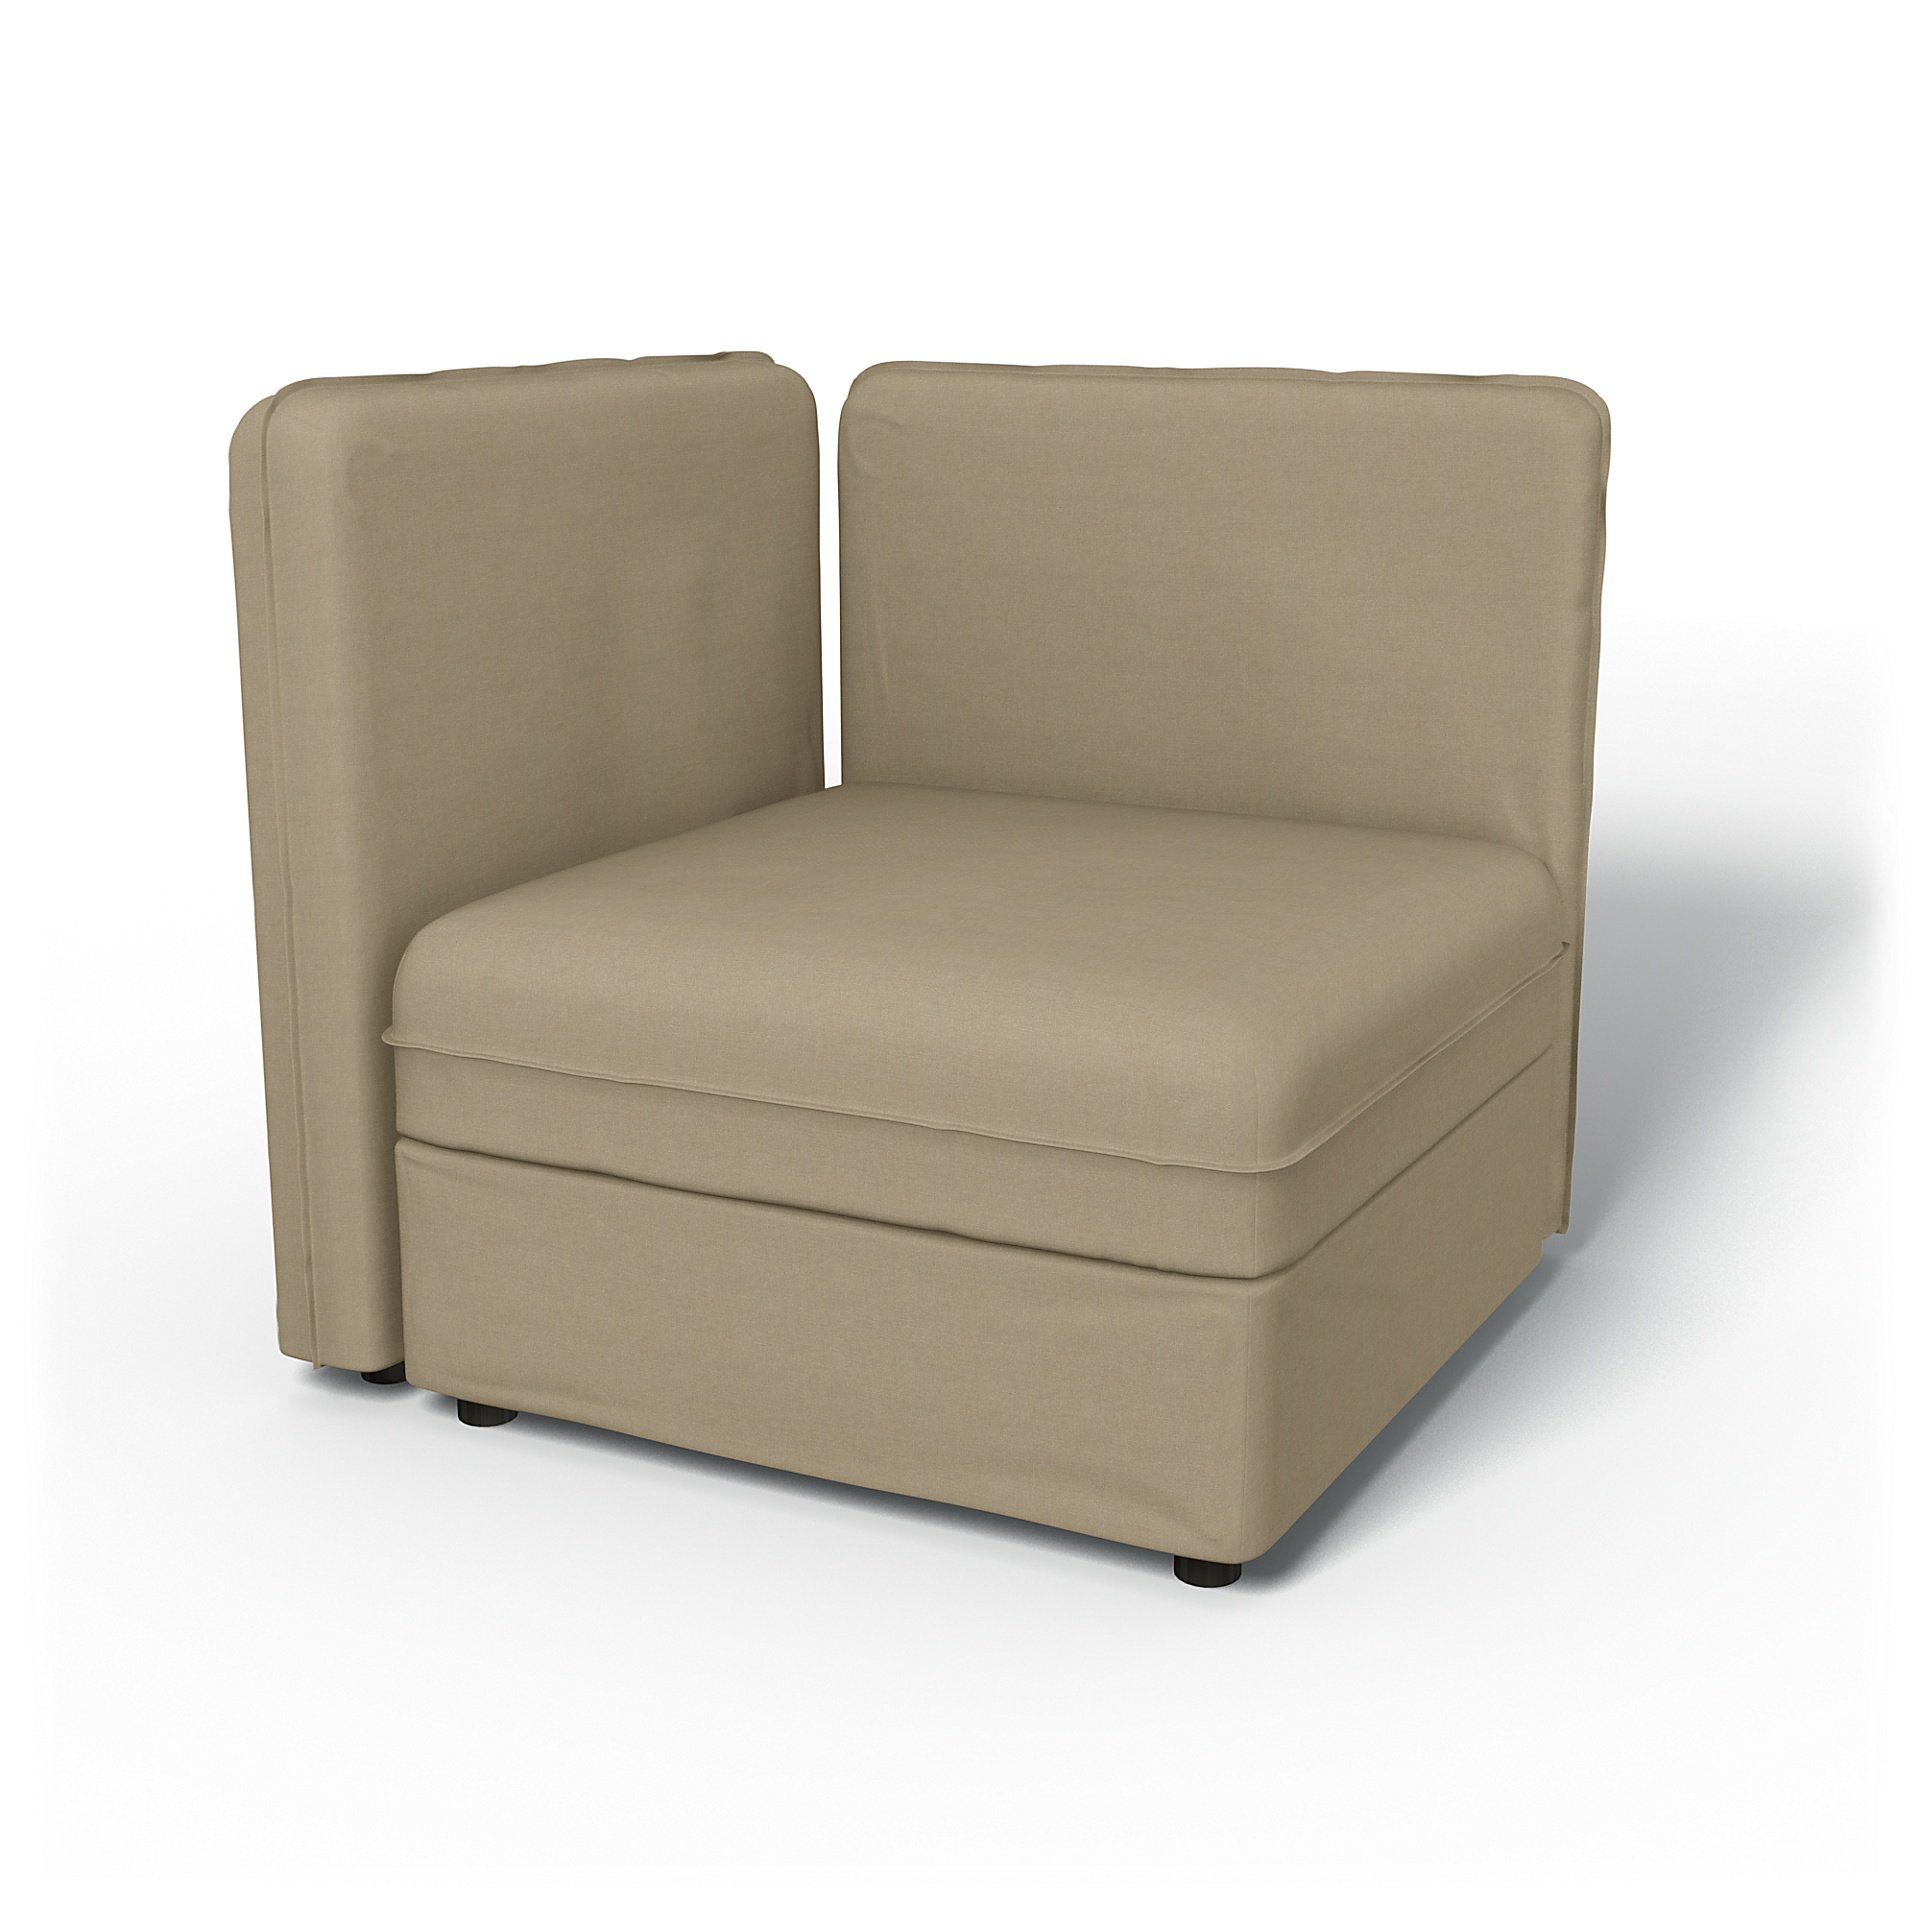 IKEA - Vallentuna Seat Module with Low Back and Storage Cover 80x80cm 32x32in, Tan, Linen - Bemz